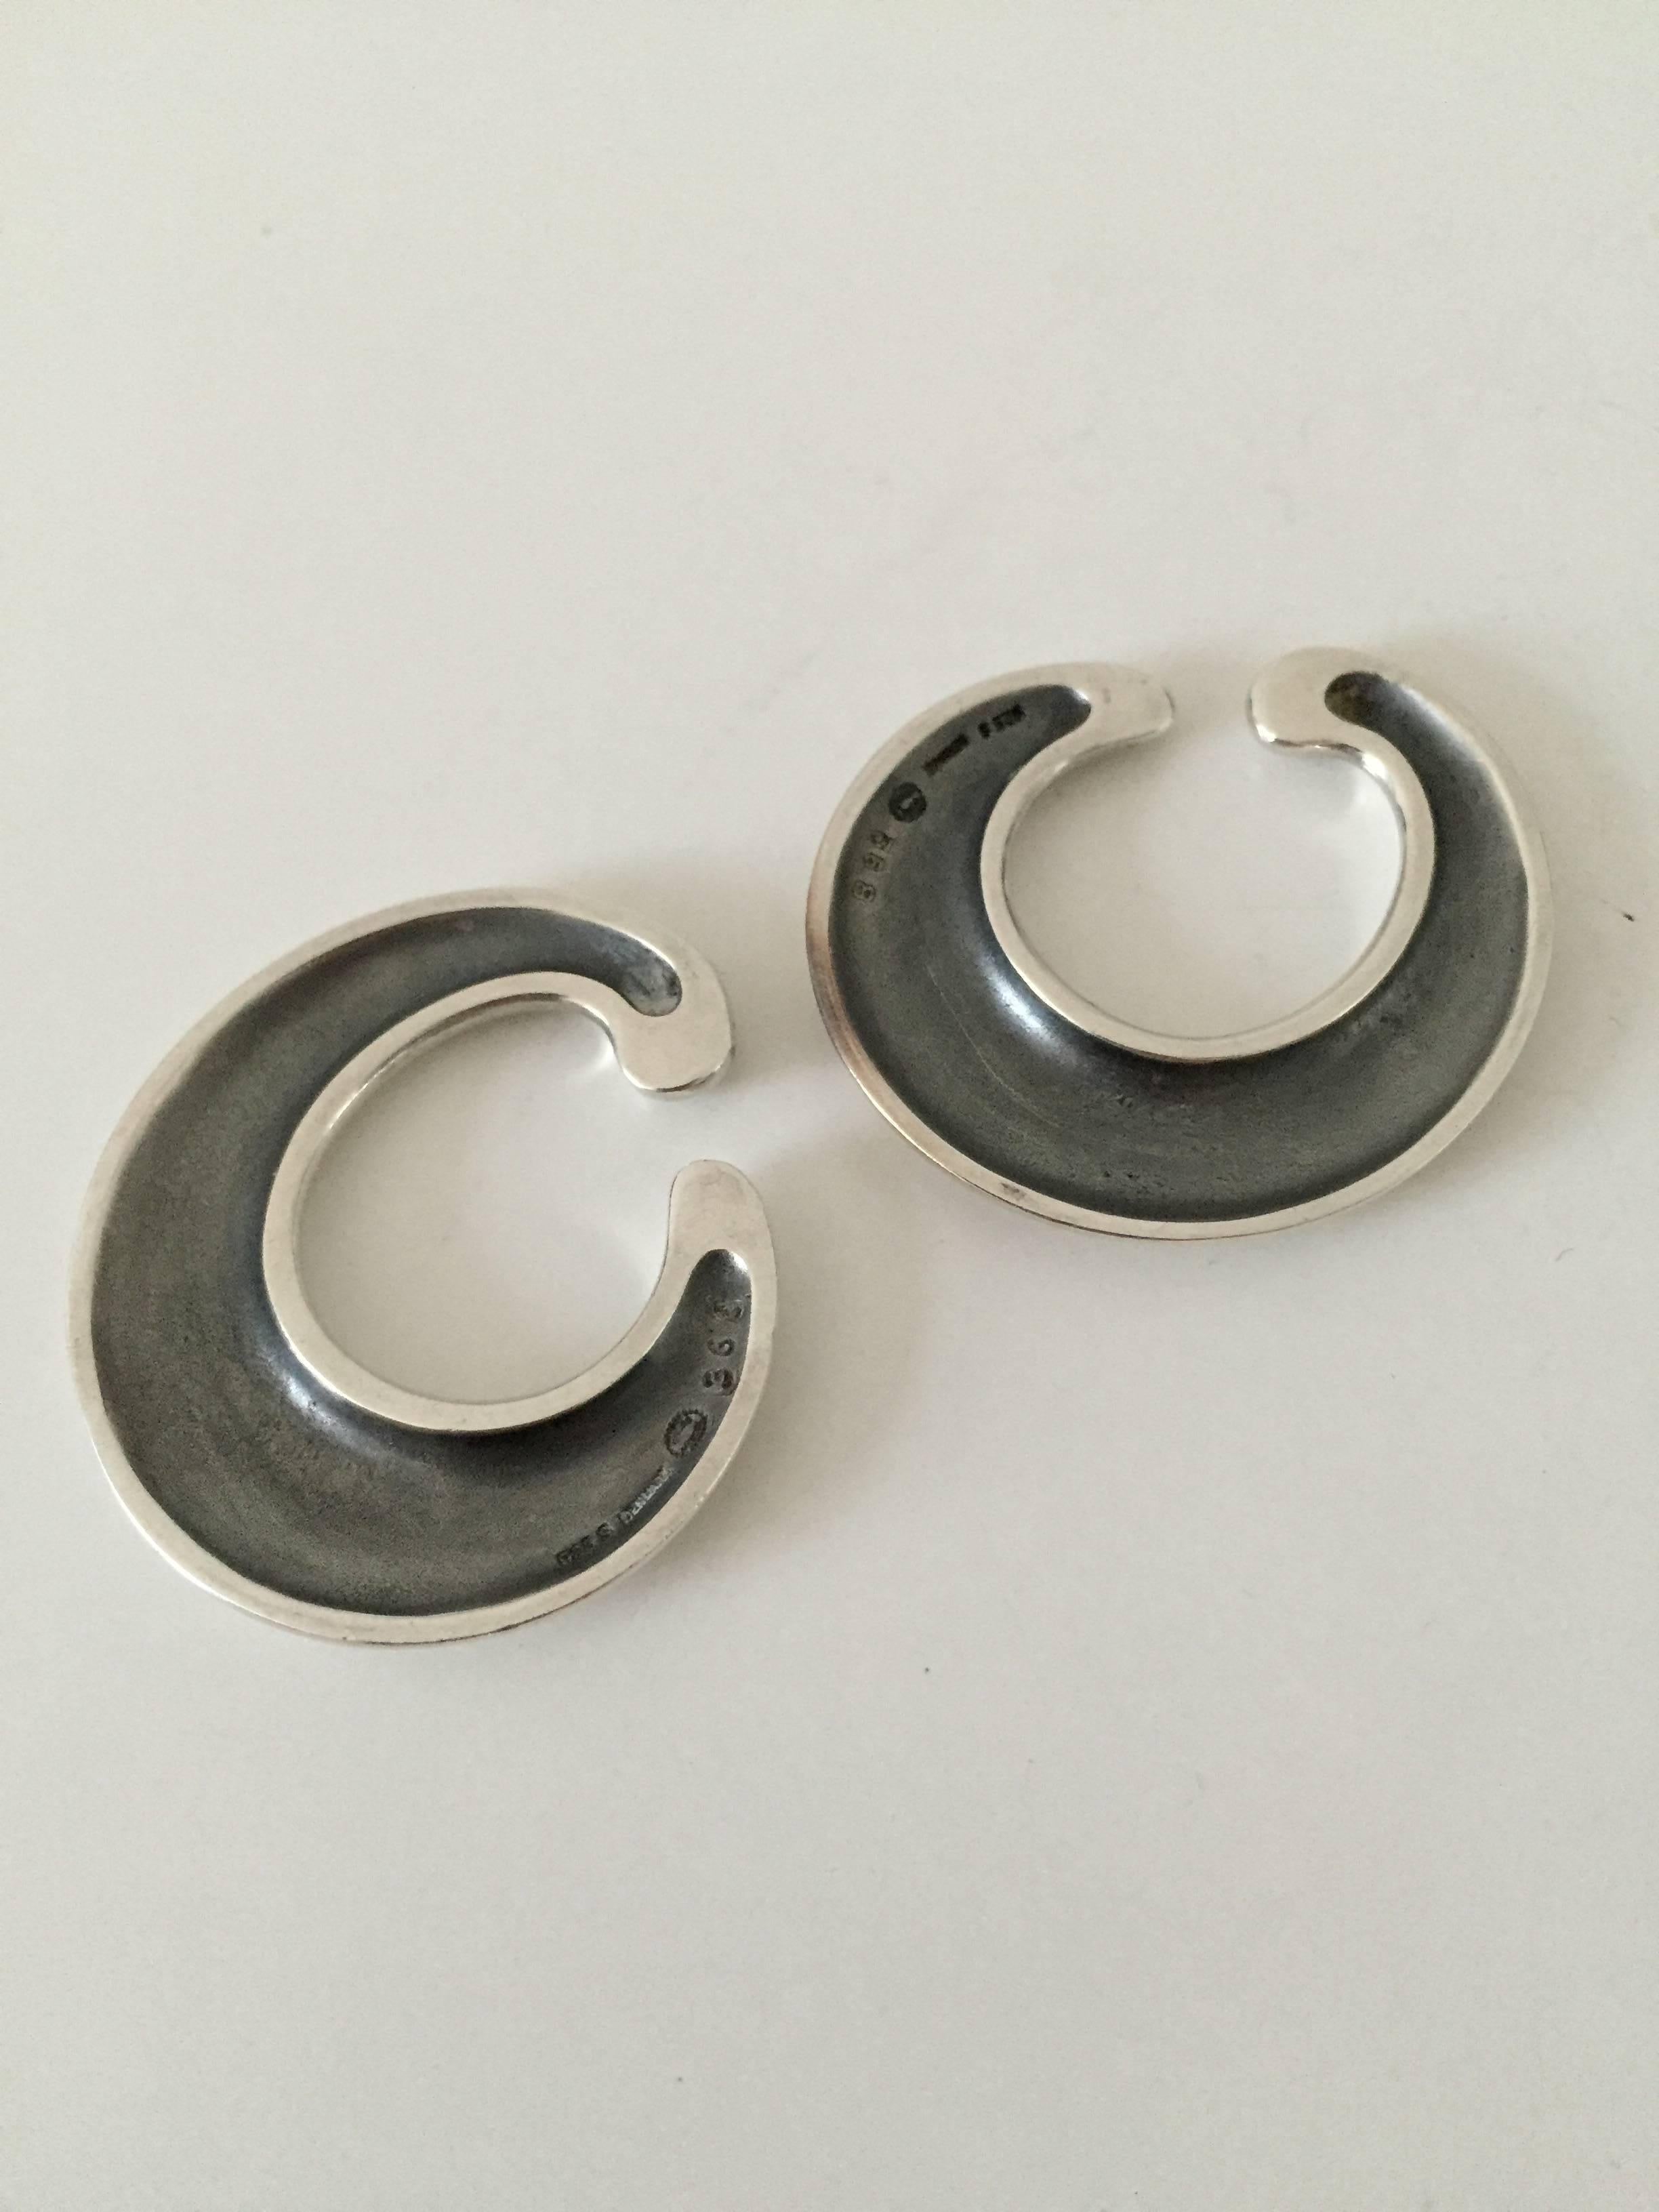 Georg Jensen sterling silver earrings #368. In good condition.

Measures 3.7 cm (1 29/64").
Weighs 21 g / 0,75 oz.

Swedish born Torun is behind some of Georg Jensens most famous jewelry designs, including 'Mobius', 'The Vivianna / Open Watch',